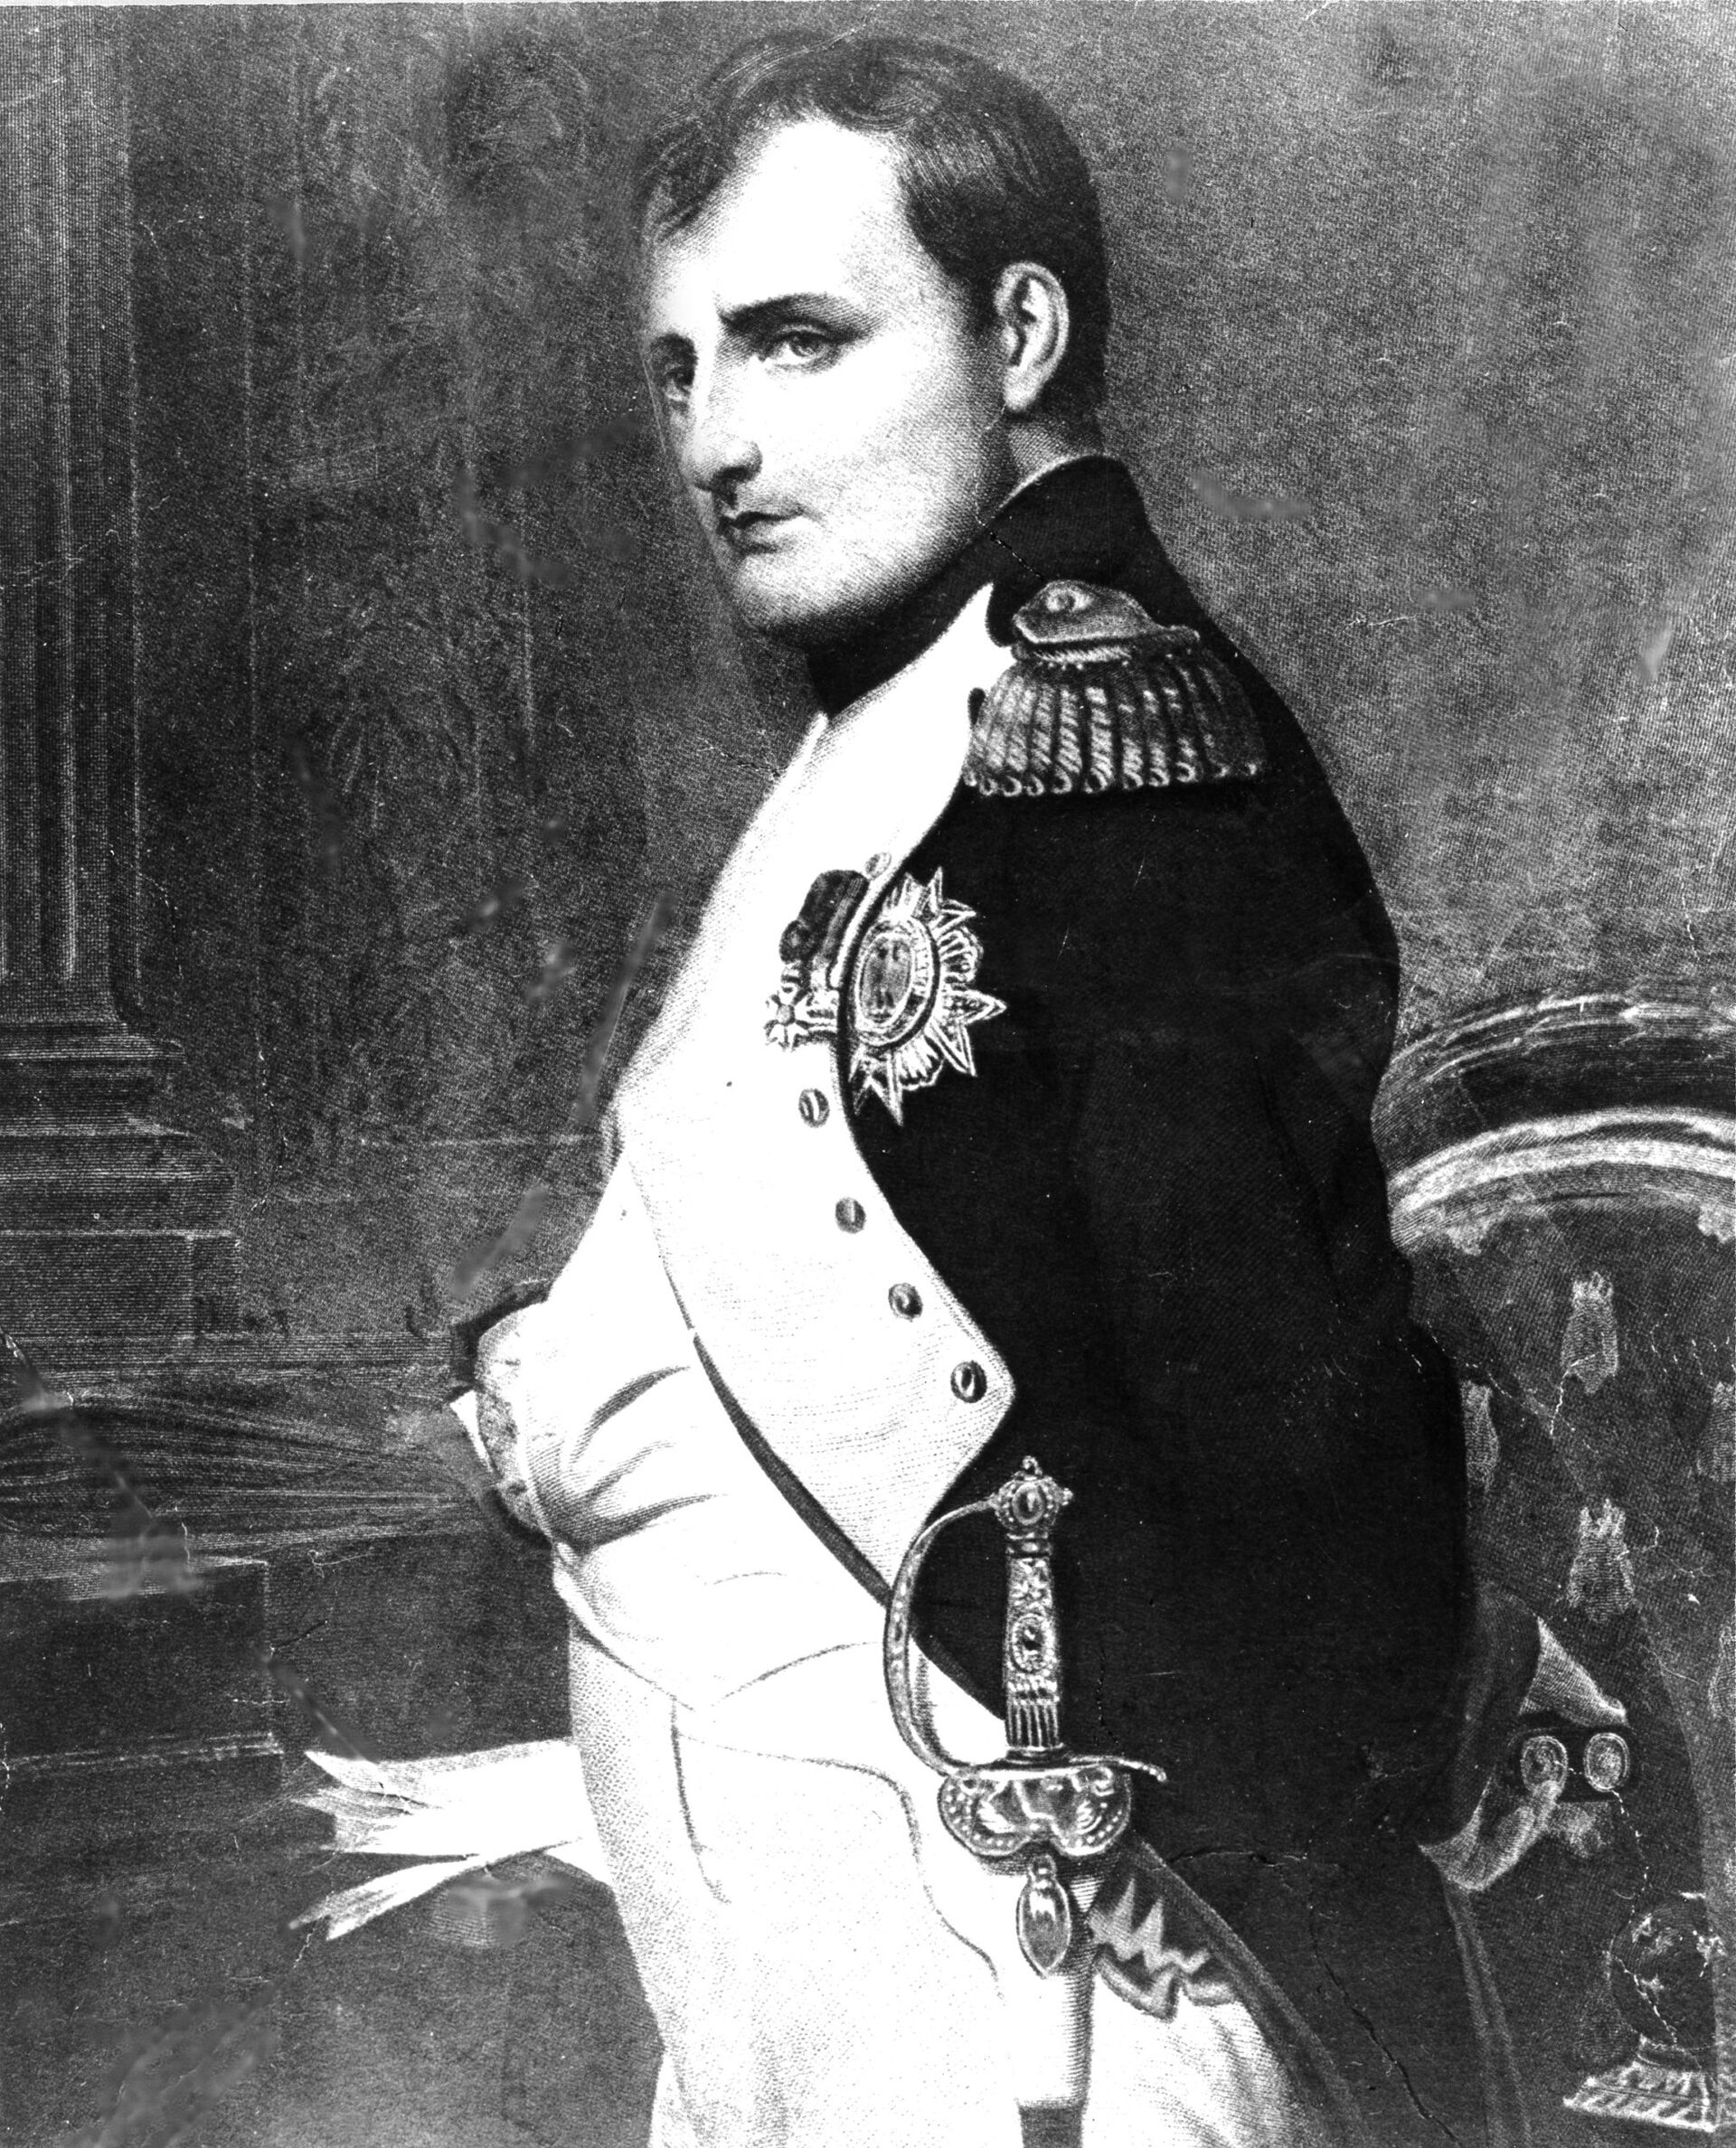 Smell of Death: Napoleon 'Overdosed' Himself With Cologne, Leading to Fatal Cancer, Scientist Claims - Sputnik International, 1920, 08.05.2021